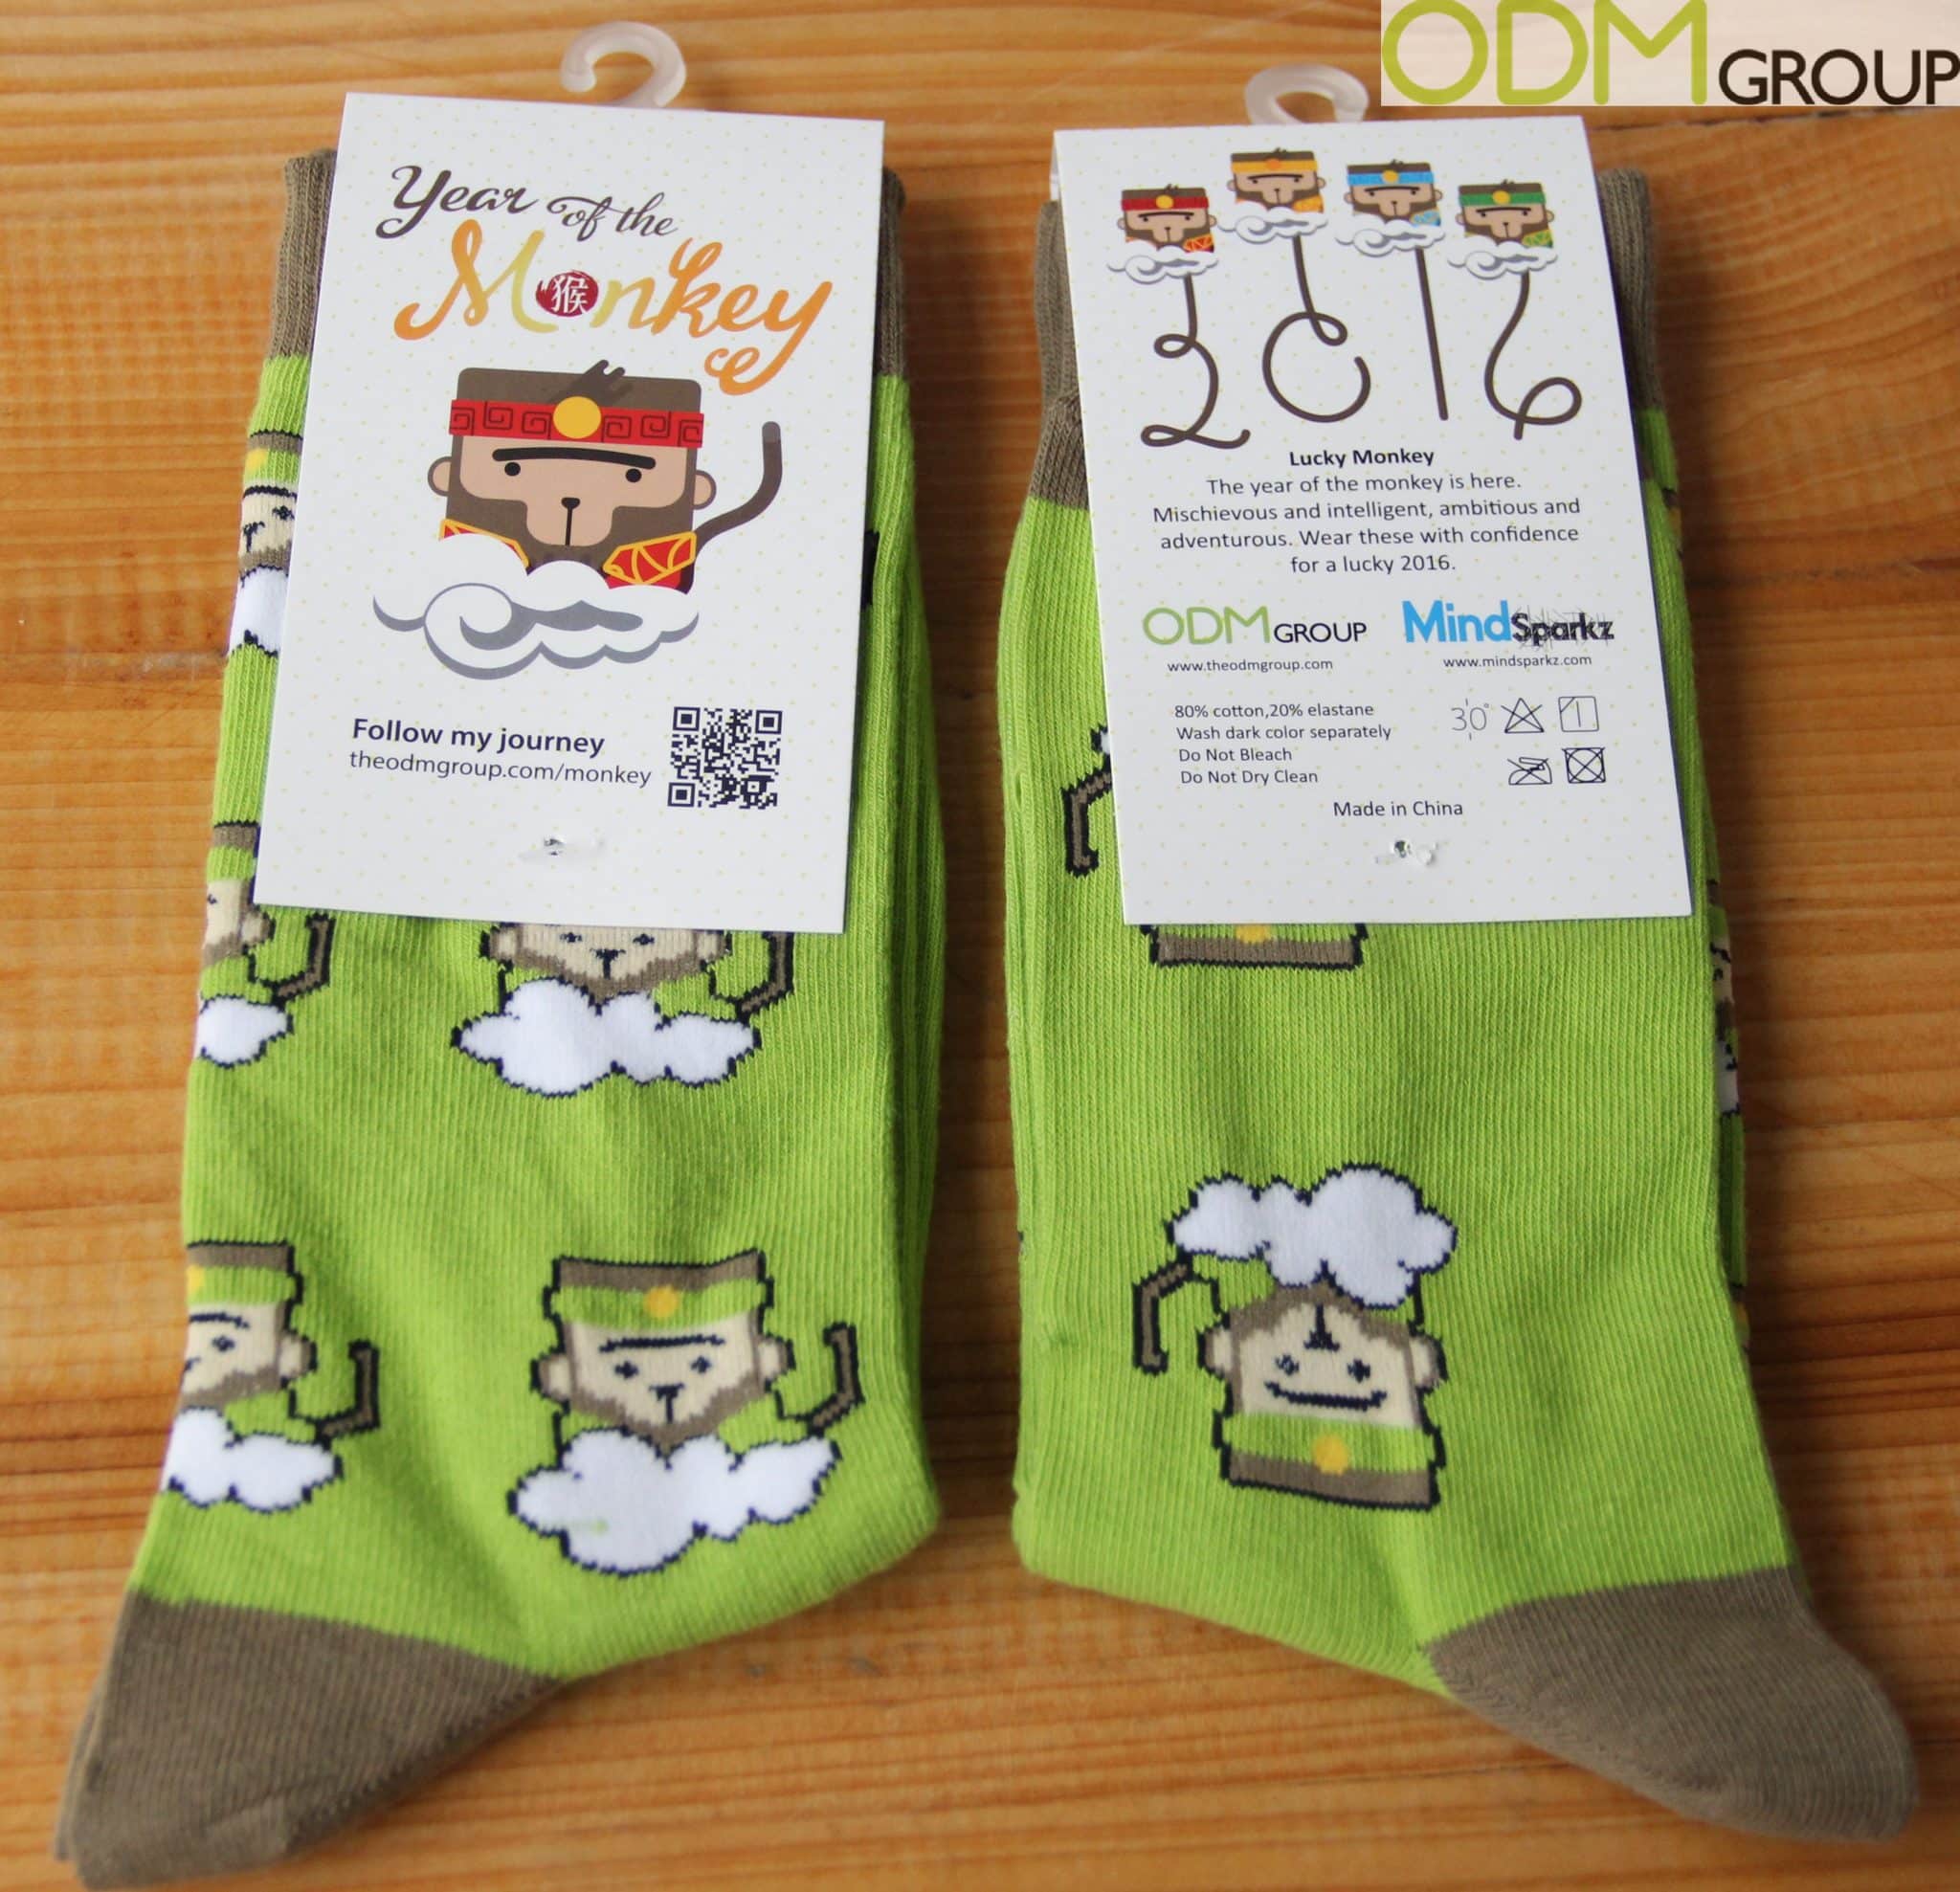 Introducing our Green Lucky Monkey Socks